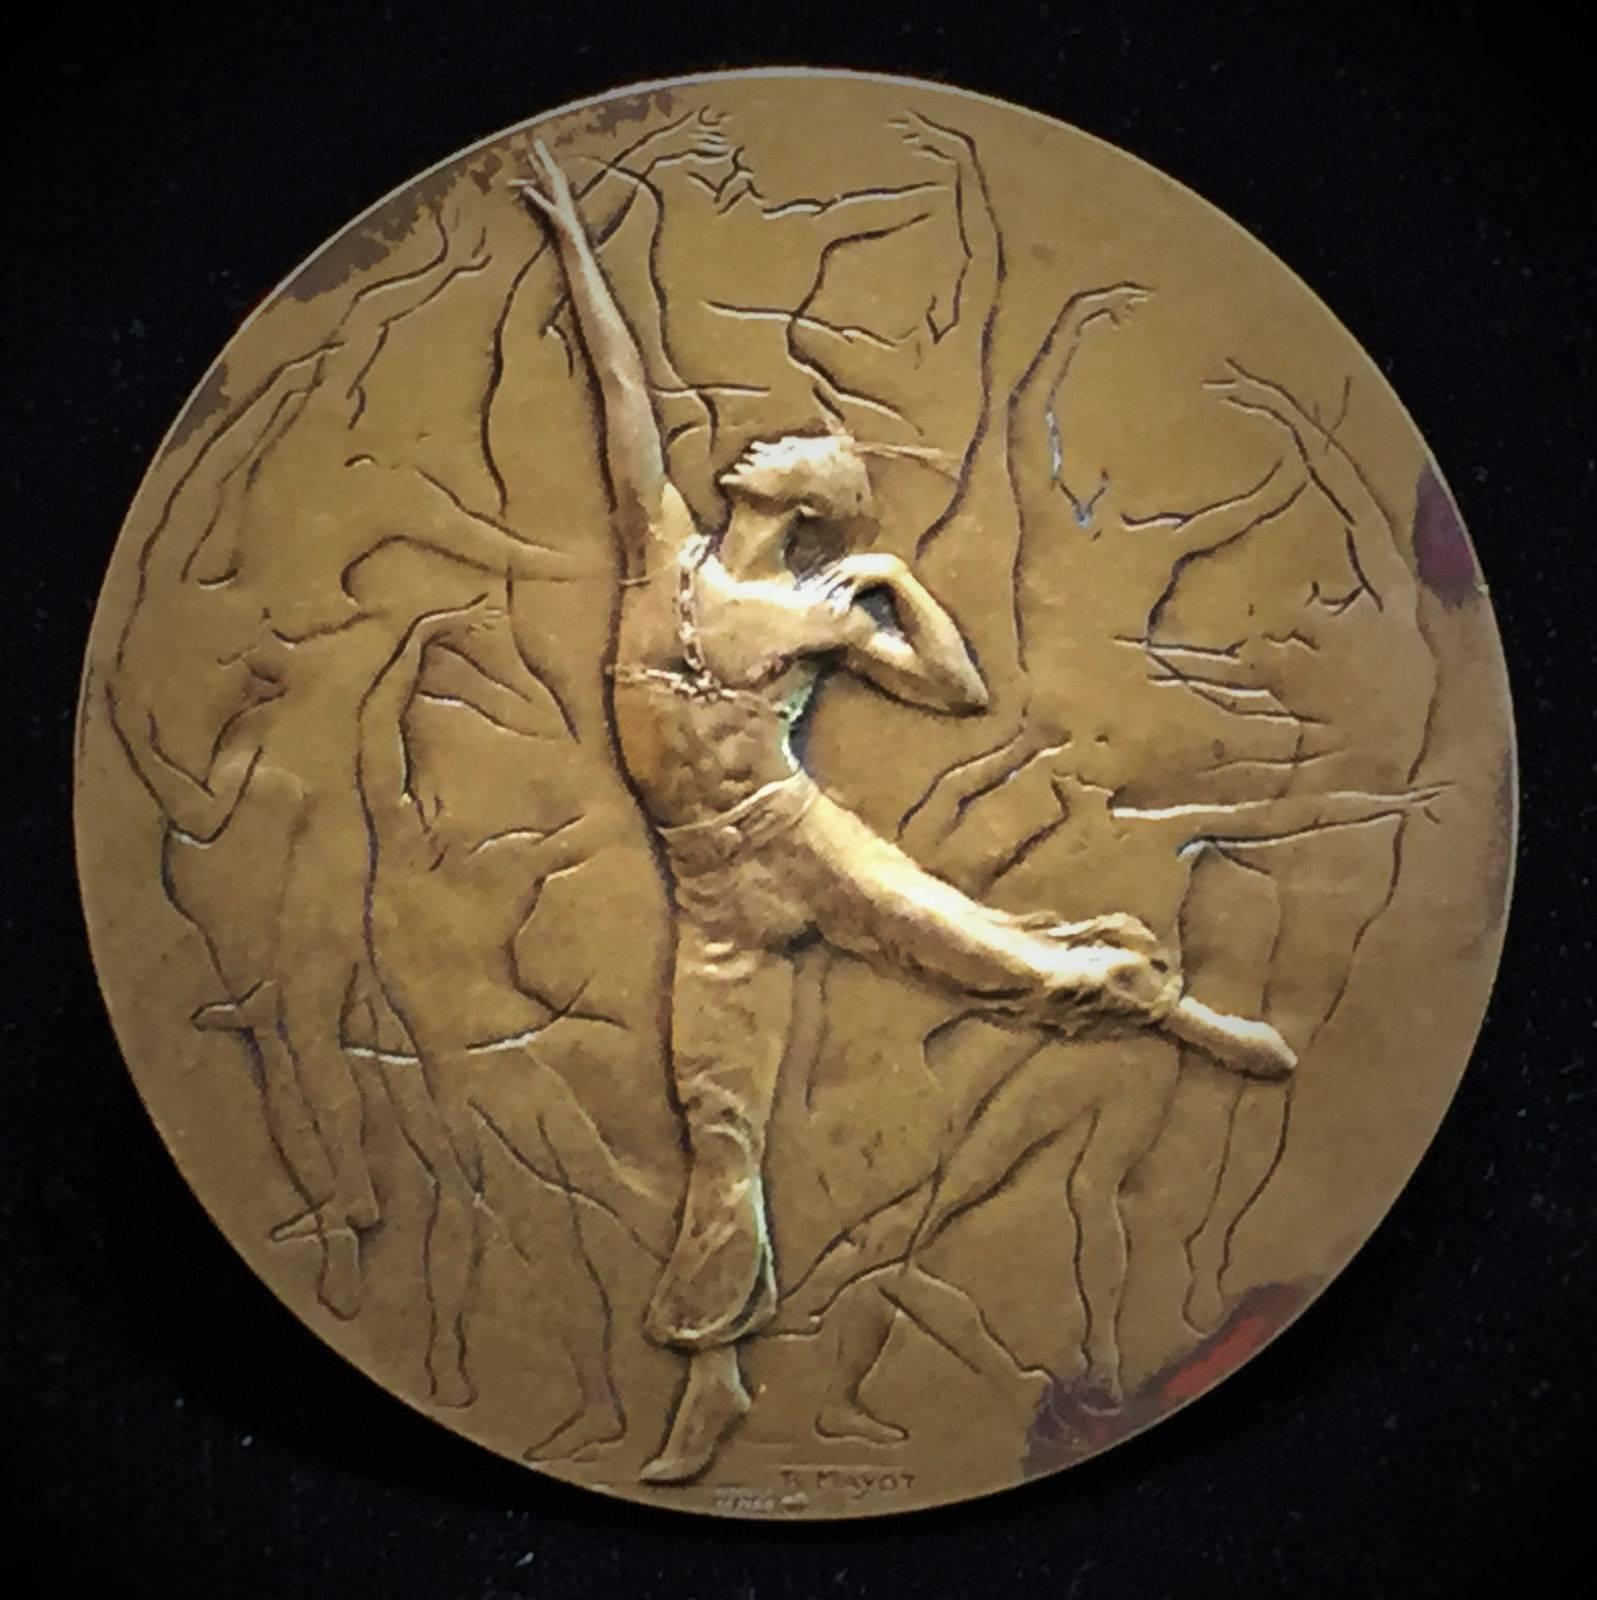 This beautiful French commemorative bronze medal was created in 1996 by the world-famous 